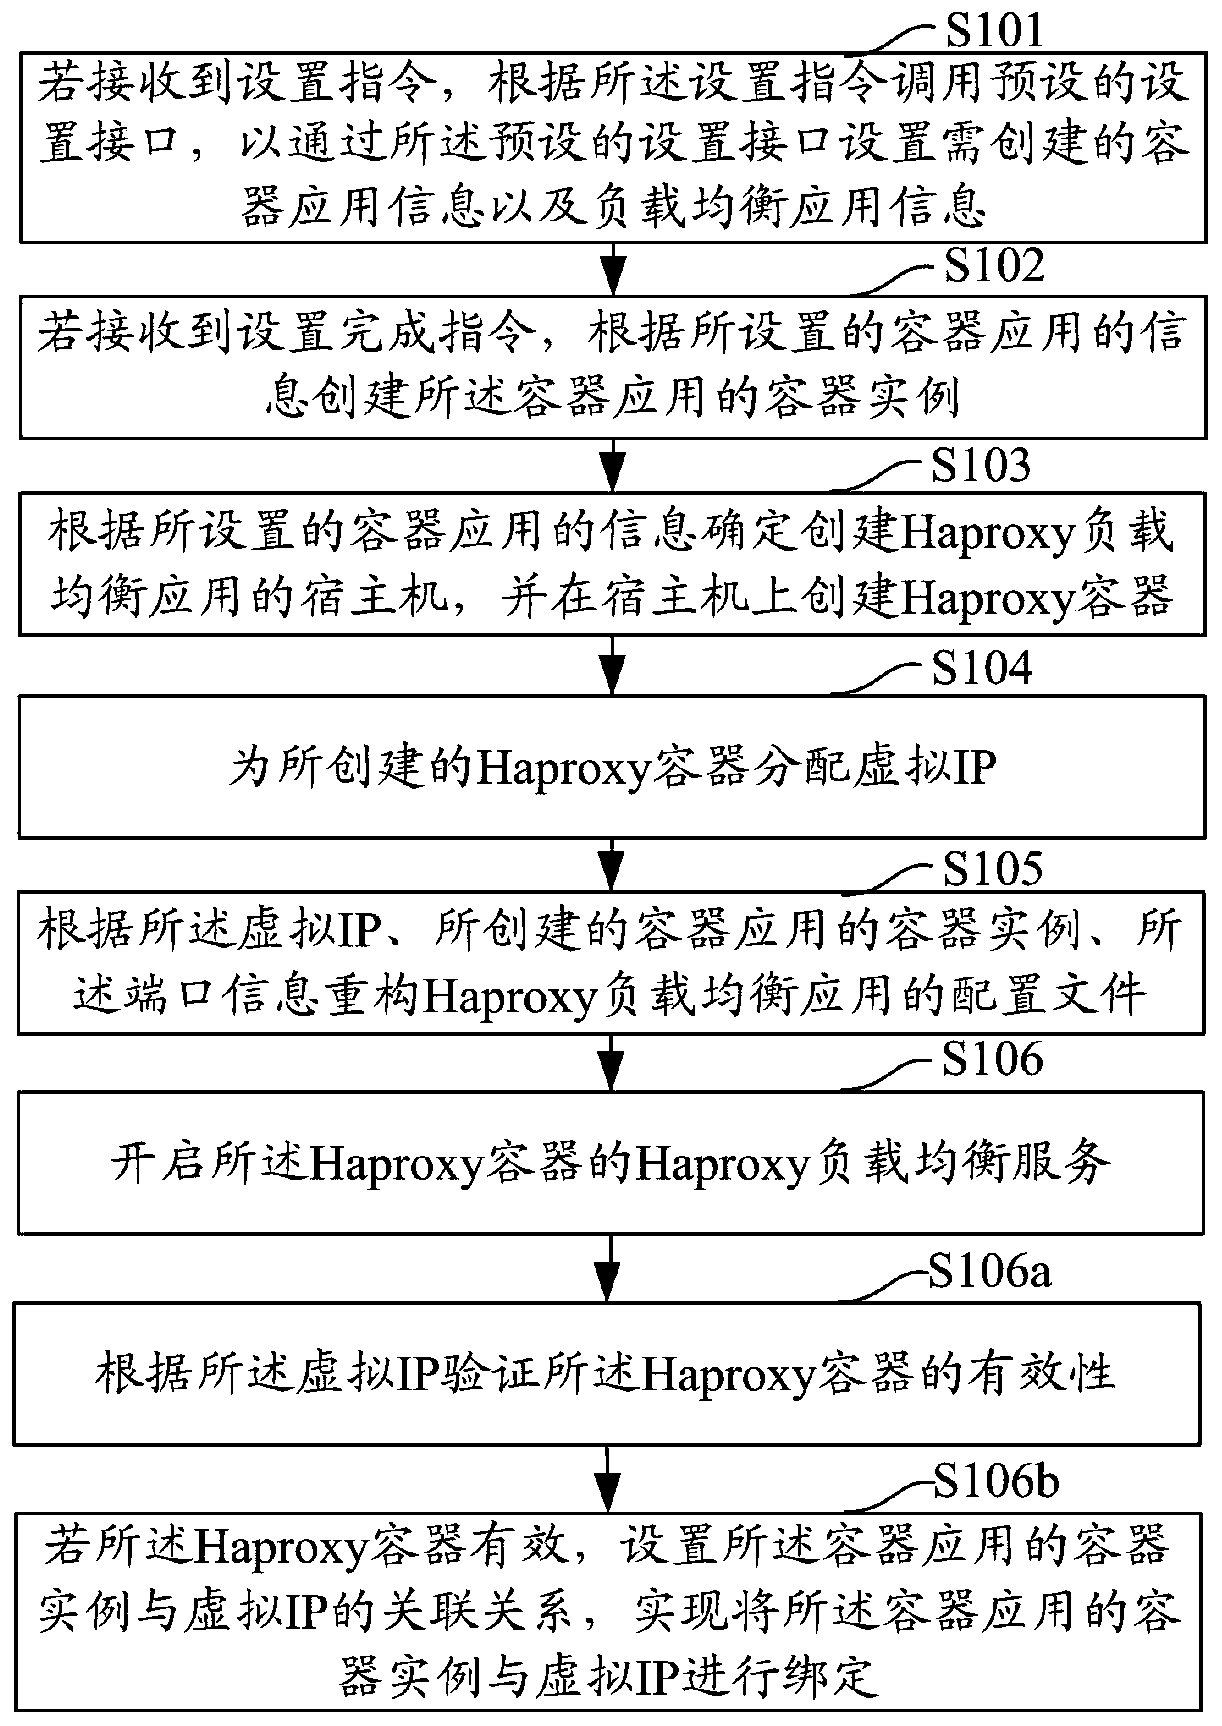 Load balancing application creation method and device, computer device and storage medium